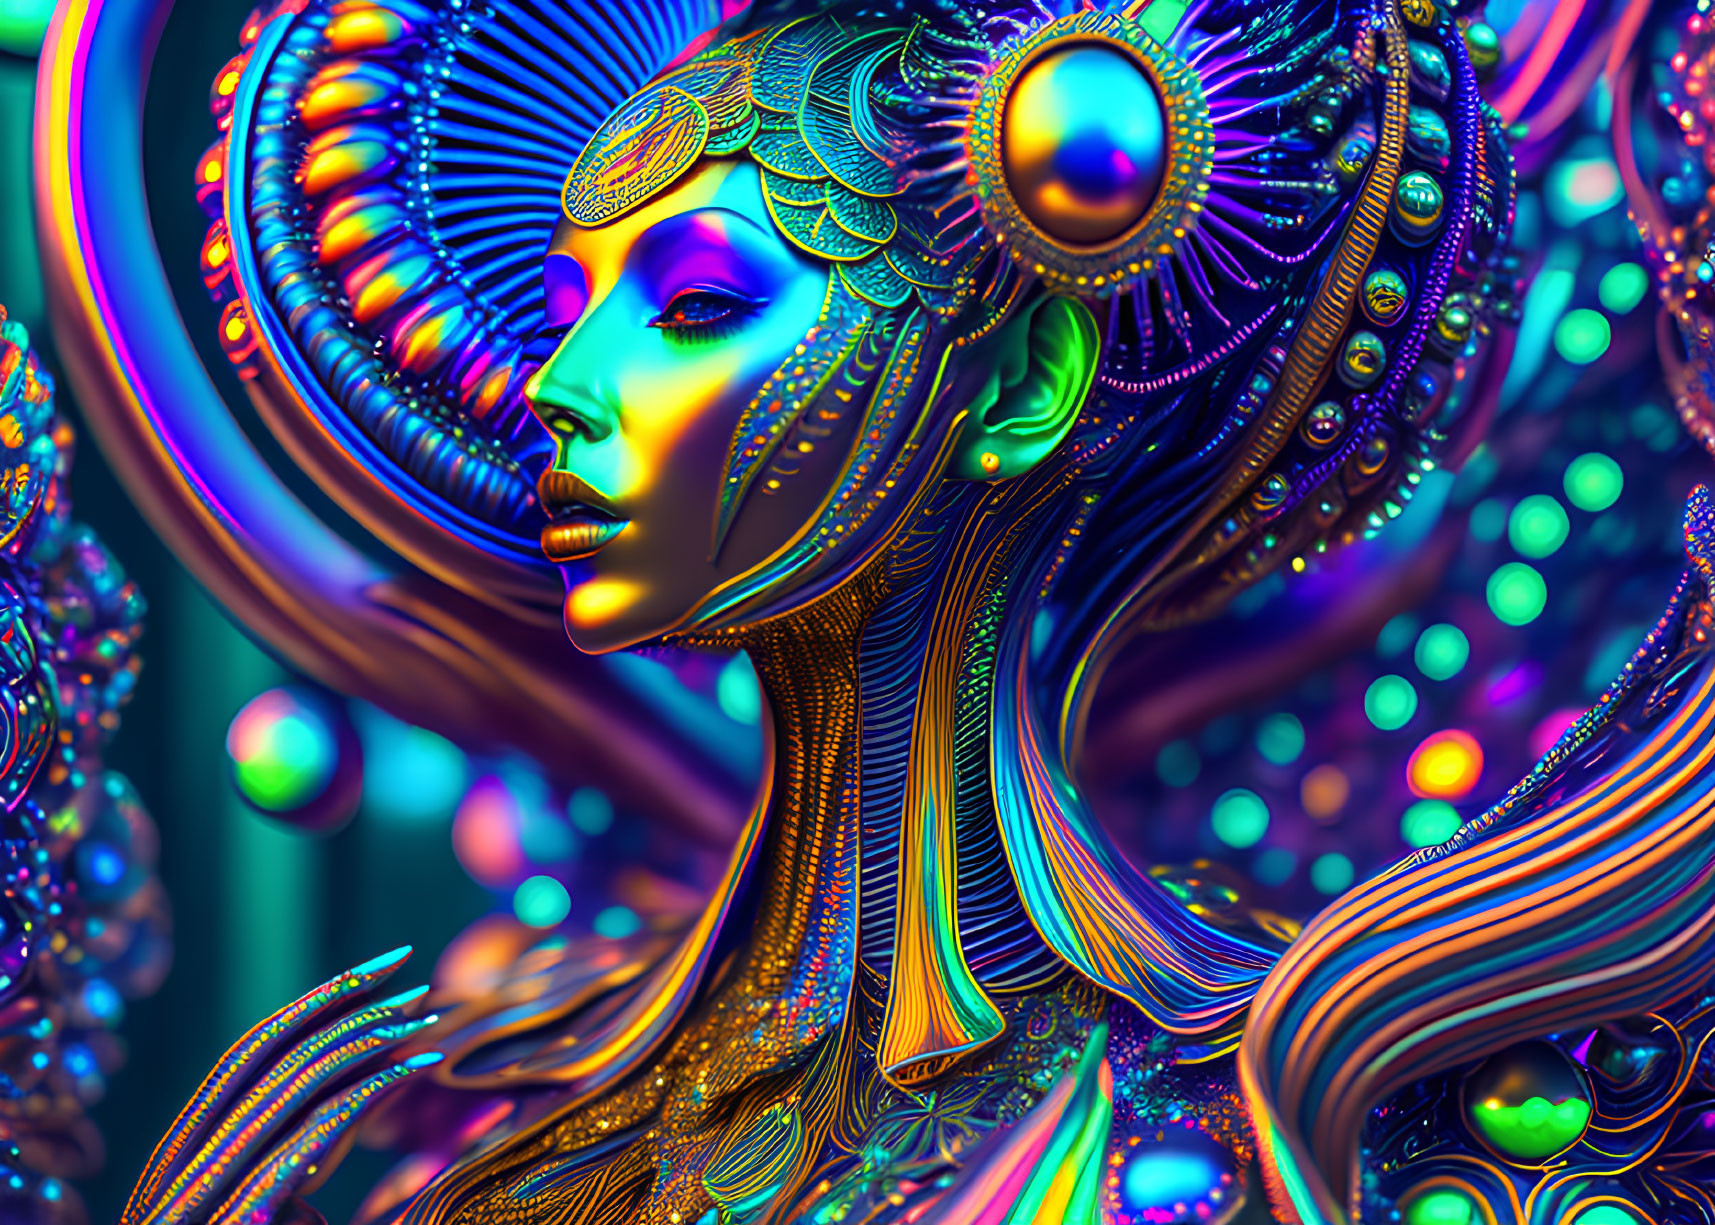 Colorful surreal portrait of a female figure with intricate patterns and ornate headgear amidst swirling neon shapes